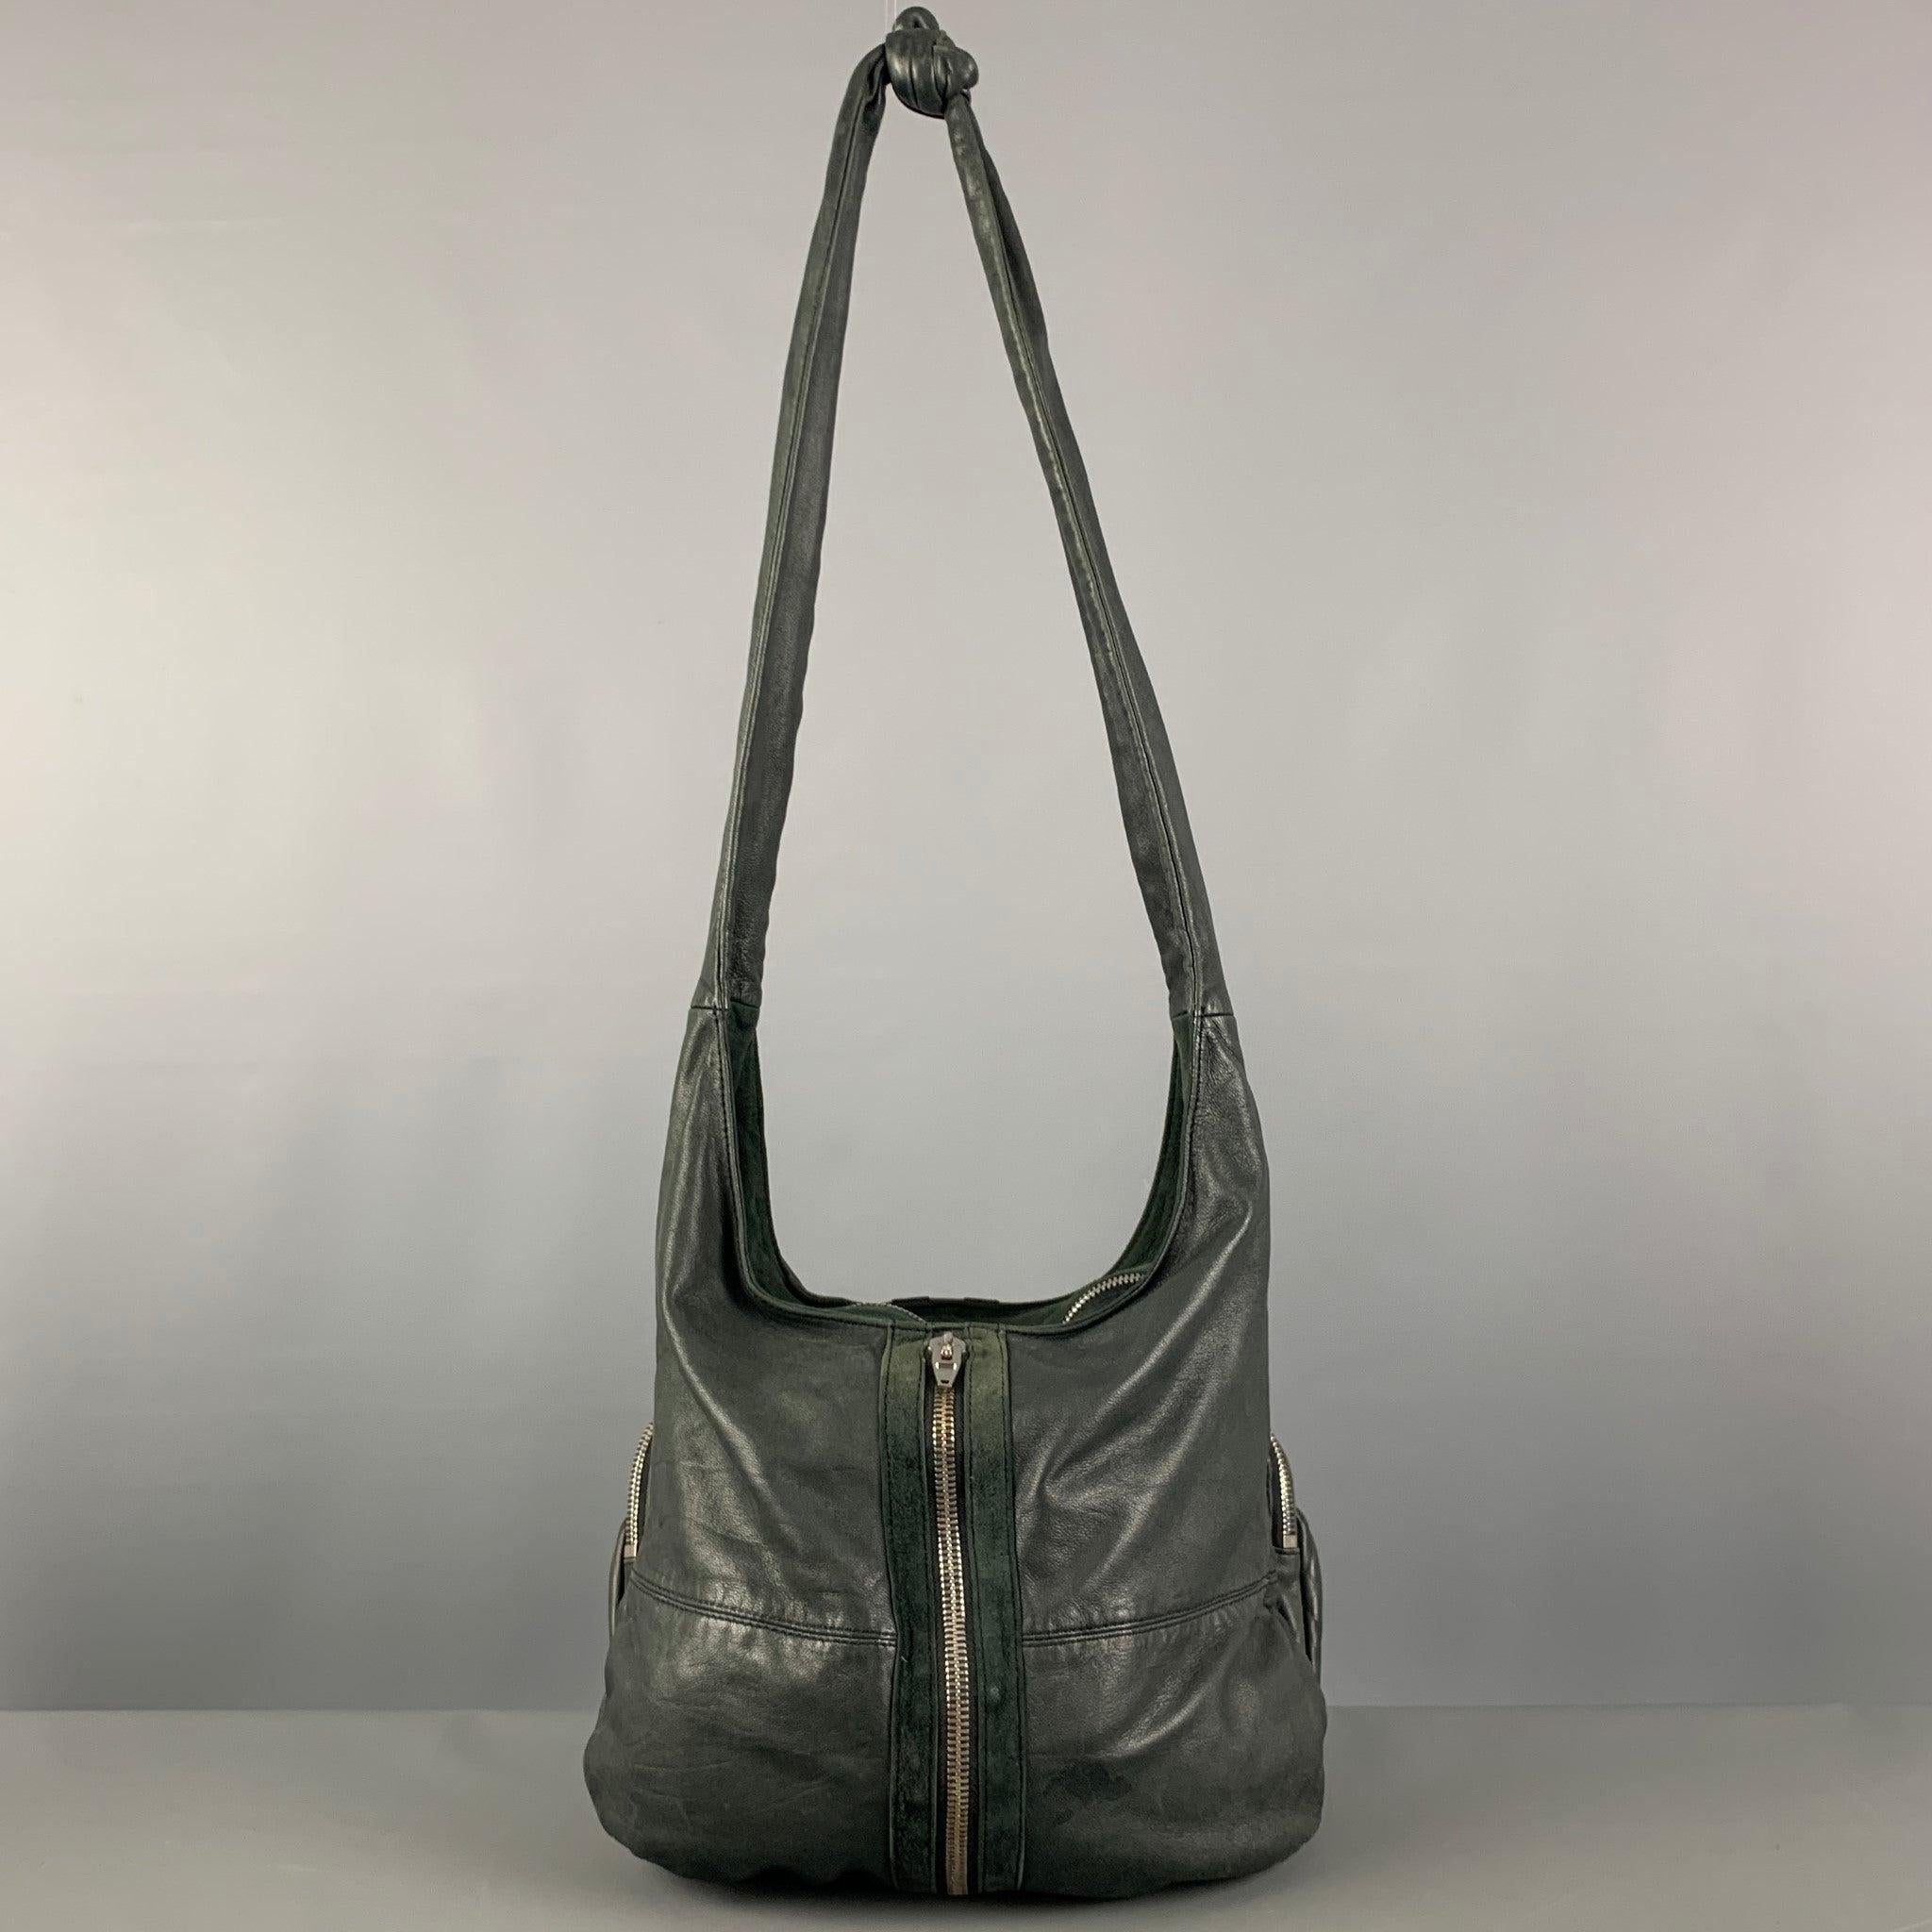 ALEXANDER WANG Green Leather Hobo Handbag In Good Condition For Sale In San Francisco, CA